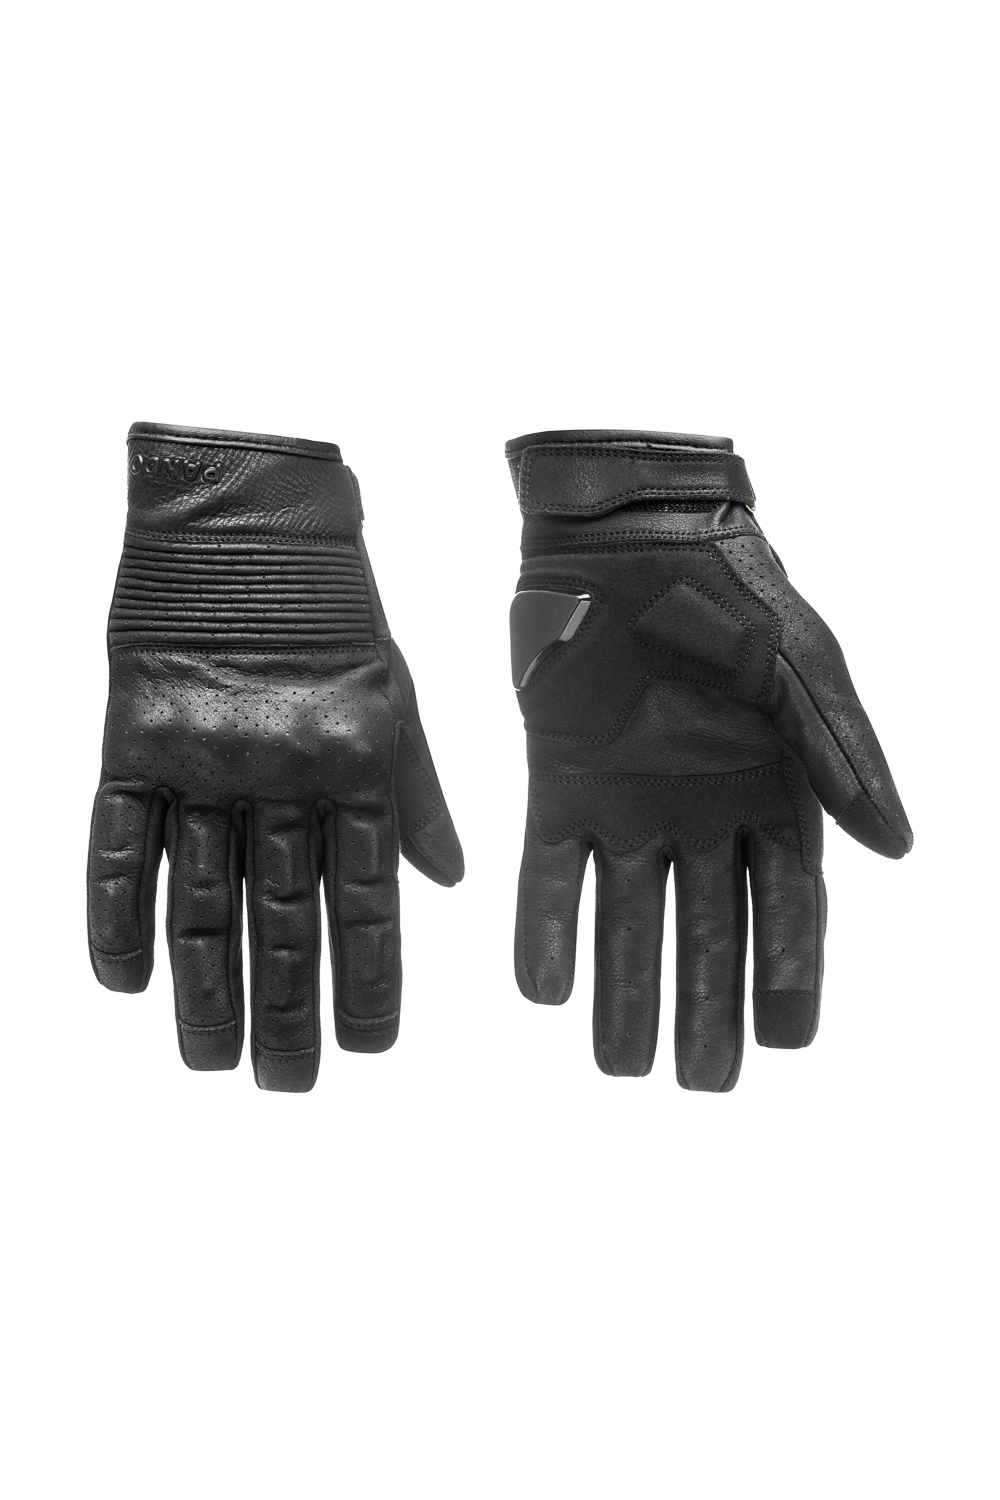 Motorcycle gloves front view both sides